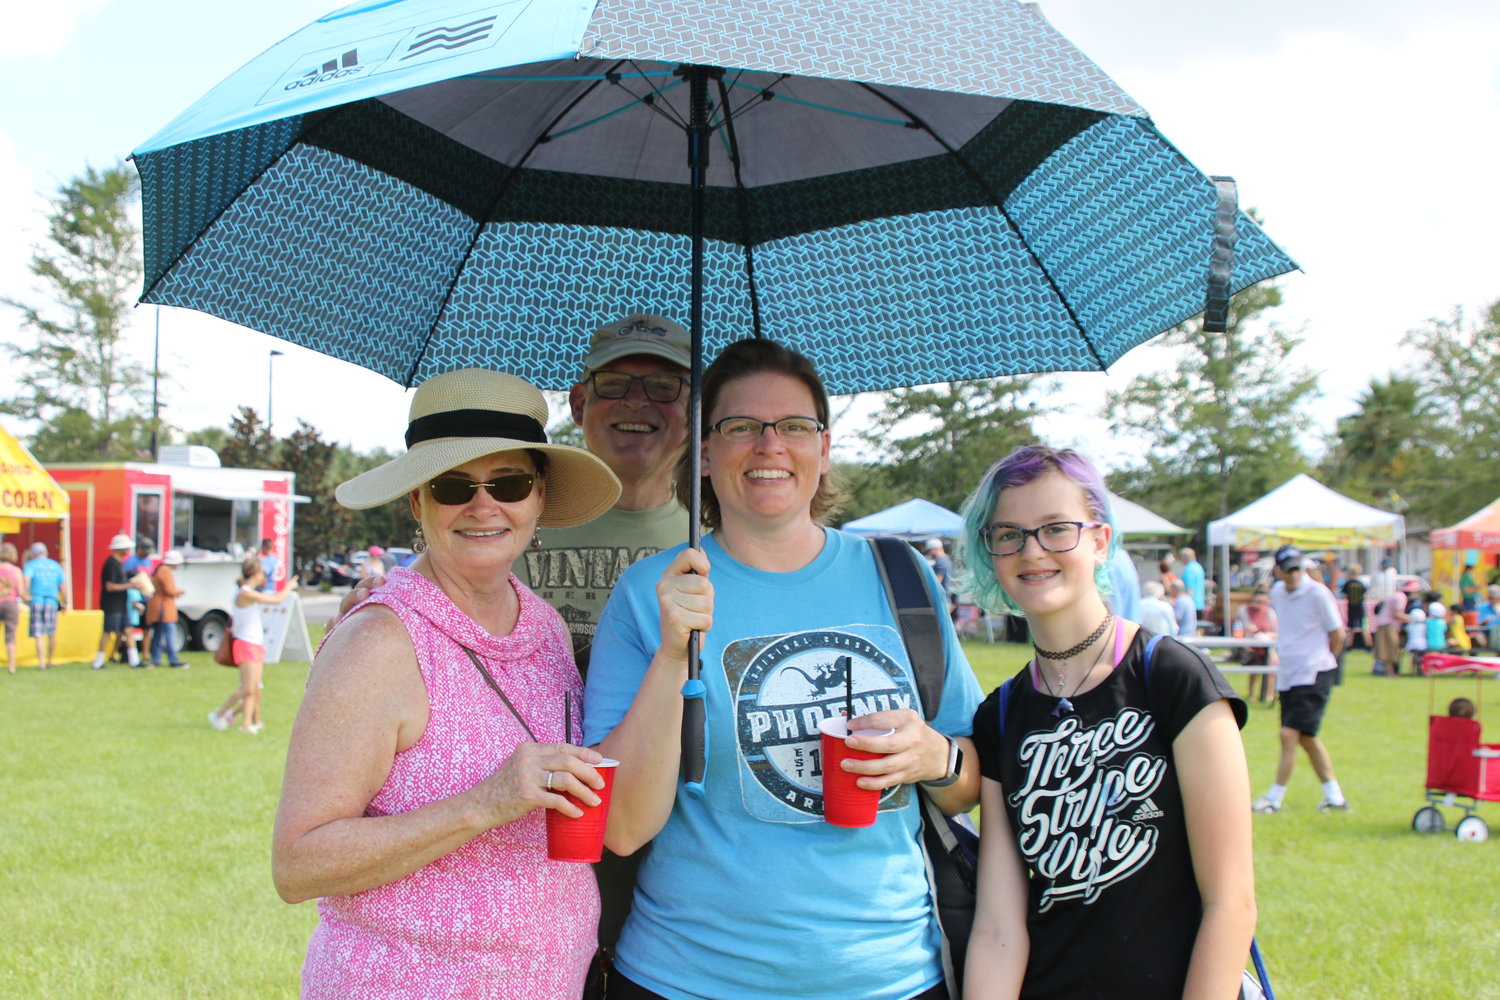 Linda and Bill Foster were visiting daughter Sarah Leaf, holding the umbrella, and their granddaughter, Annabelle Leaf. Sarah just happened to have an umbrella in the car to keep the family cool while visiting the market.